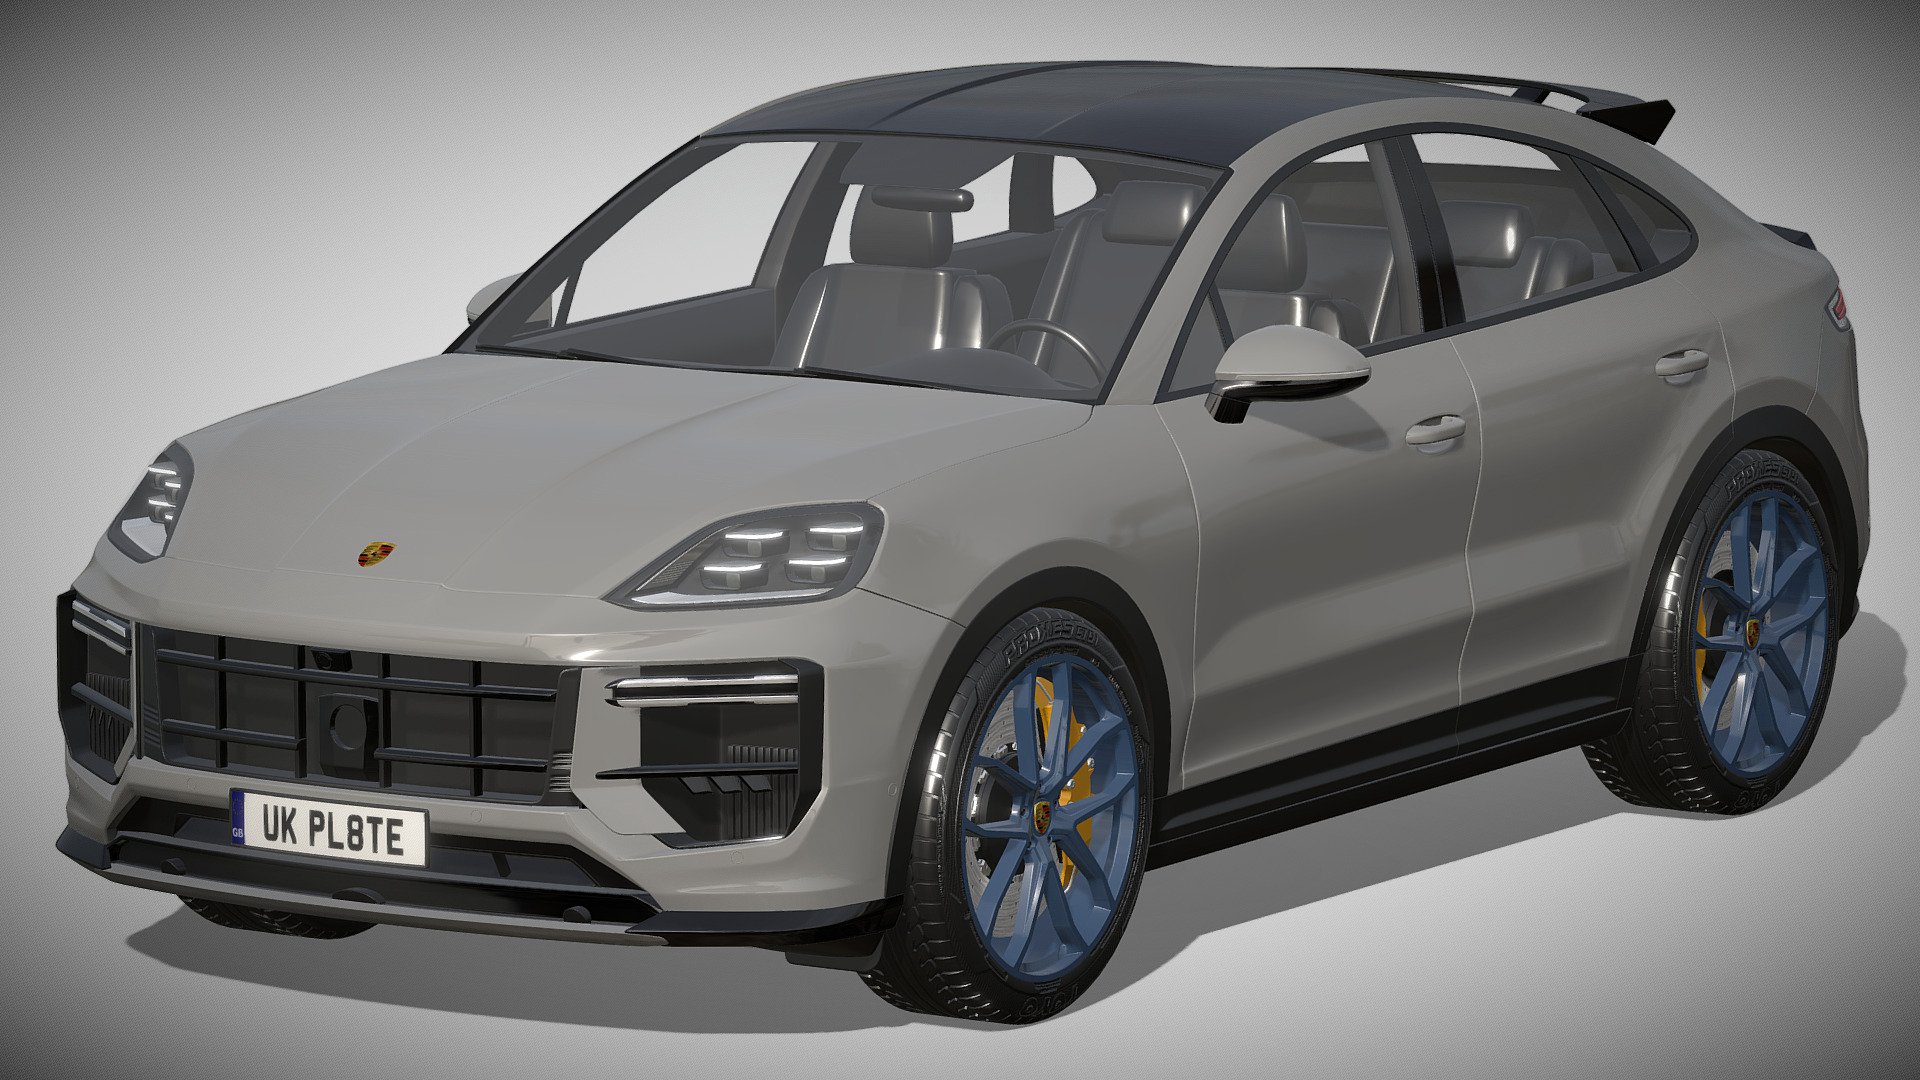 Porsche Cayenne Turbo GT 2024

https://www.porsche.com/usa/models/cayenne/cayenne-coupe-models/cayenne-coupe-turbo-gt/

Clean geometry Light weight model, yet completely detailed for HI-Res renders. Use for movies, Advertisements or games

Corona render and materials

All textures include in *.rar files

Lighting setup is not included in the file! - Porsche Cayenne Turbo GT 2024 - Buy Royalty Free 3D model by zifir3d 3d model